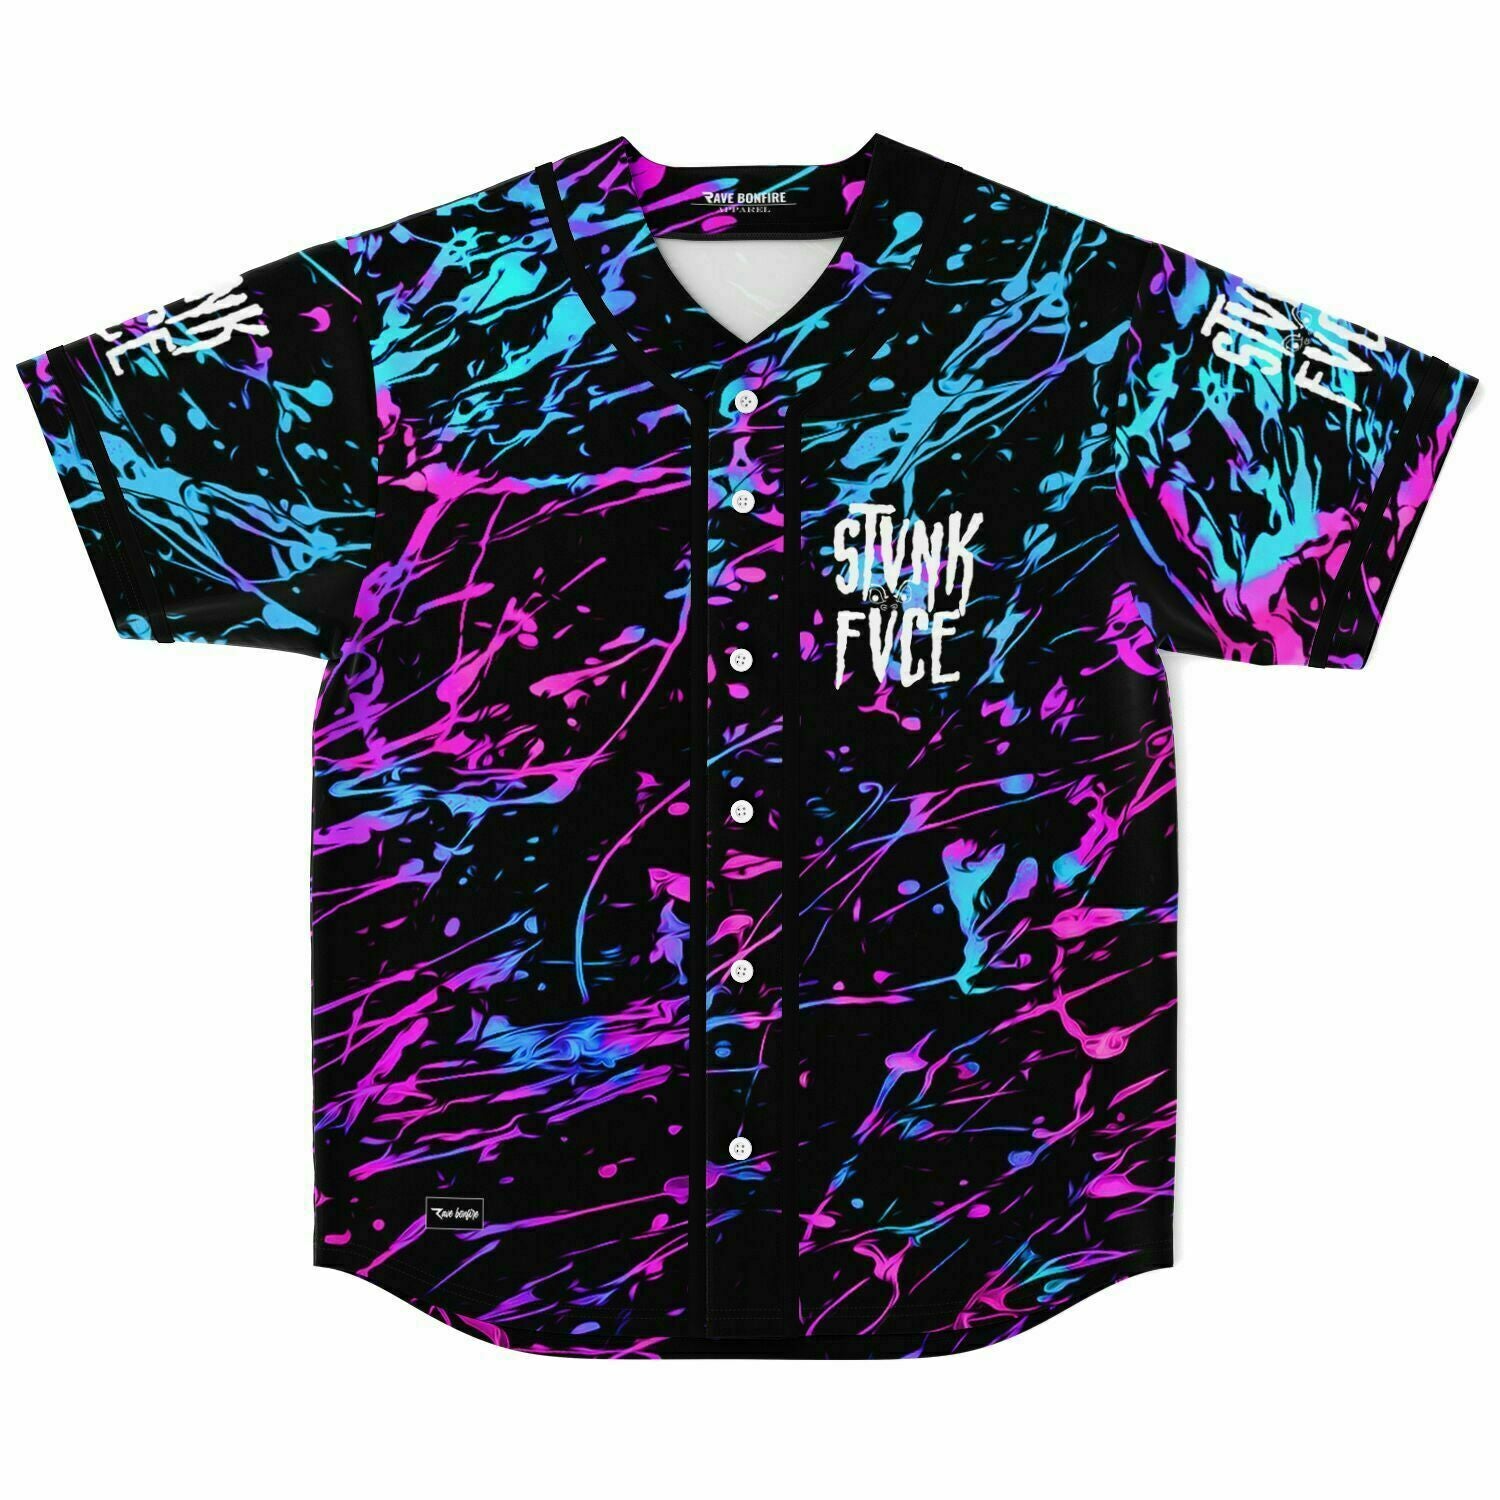 A Riley Baseball Jersey (new) with paint splatters on it.